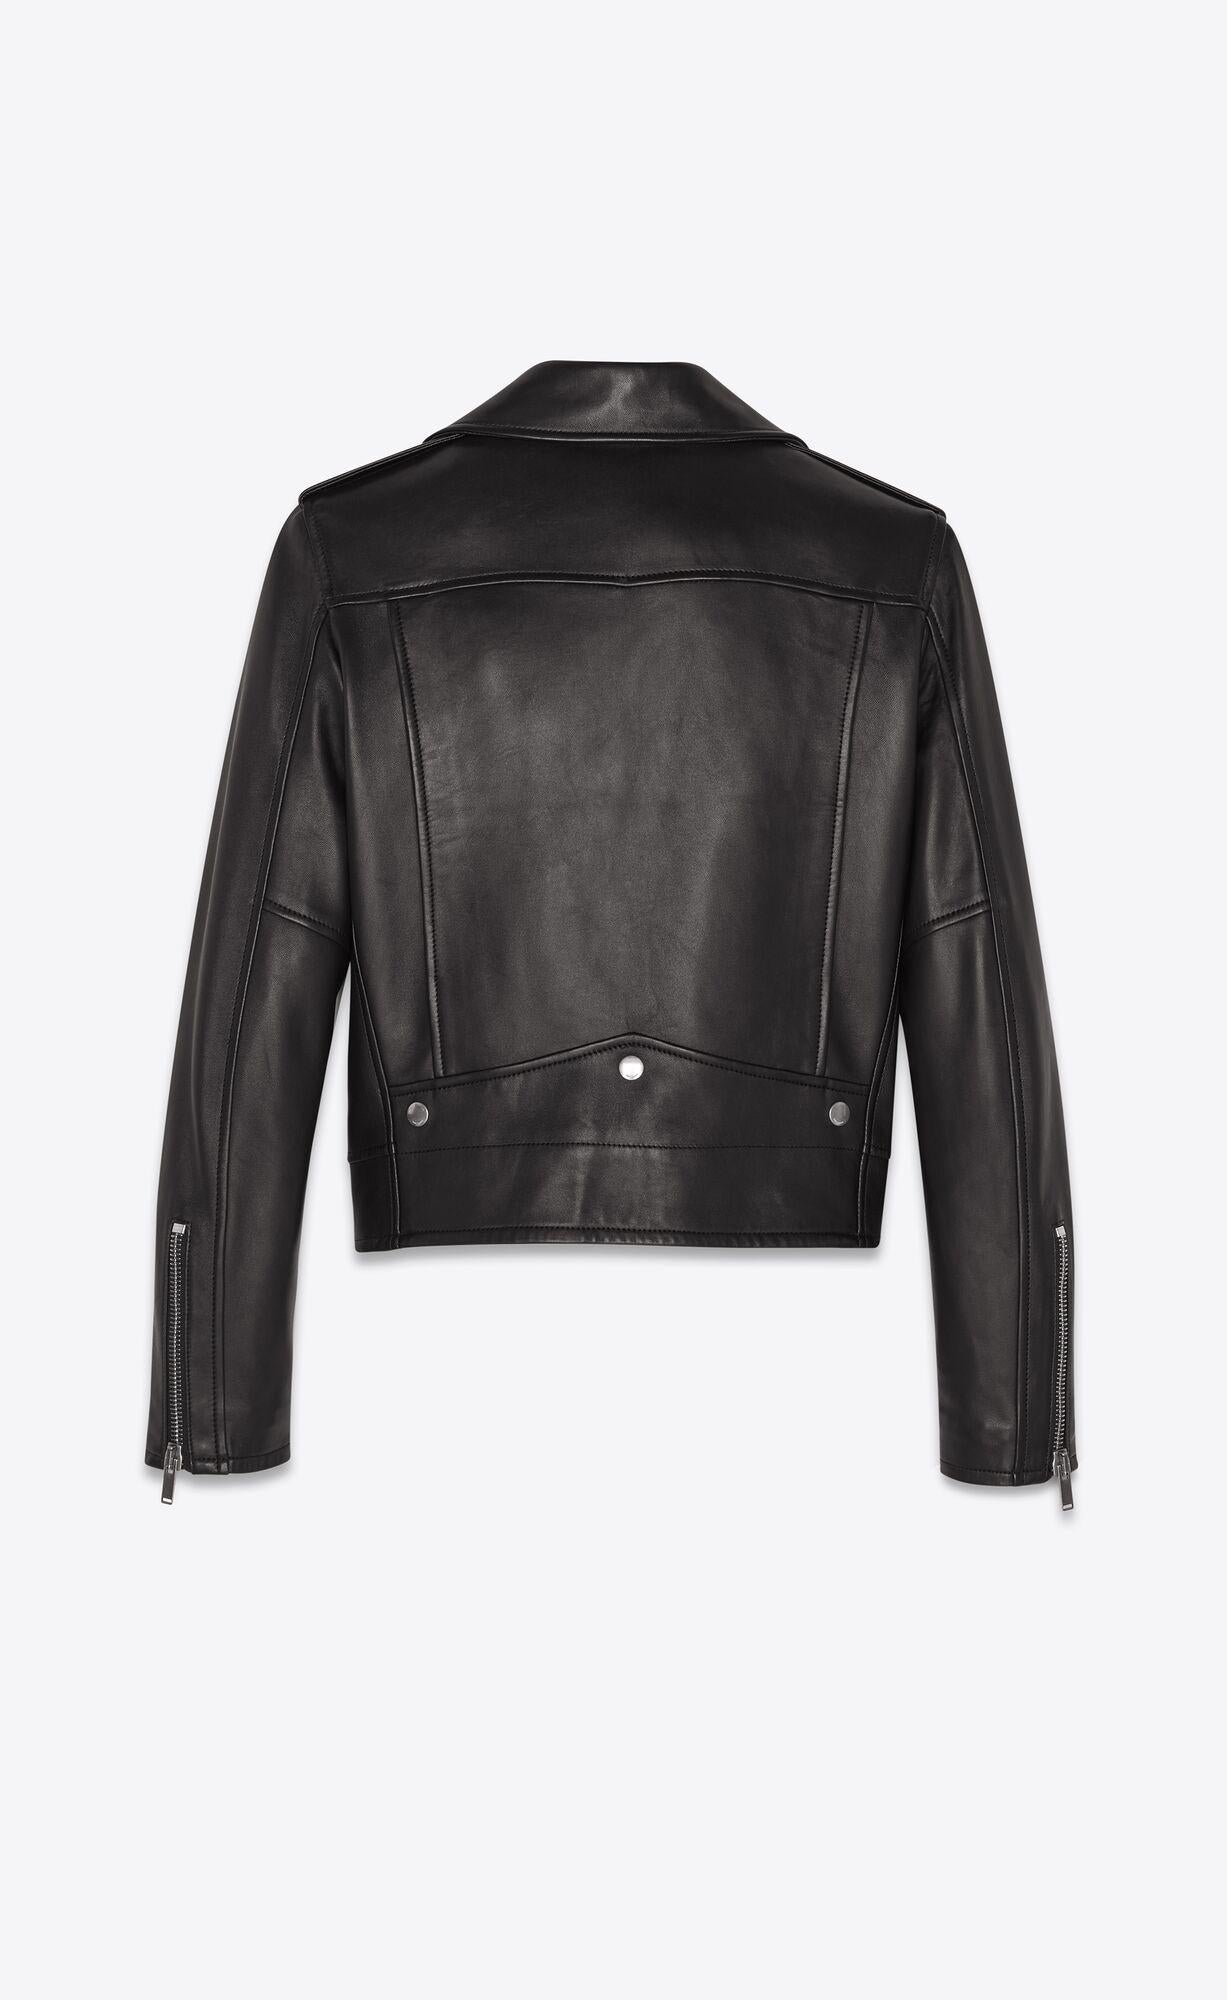 Saint Laurent Mens Classic Black Leather Motorcycle Biker Jacket Size 50

A staple in any man’s wardrobe, Saint Laurent's leather jacket puts a luxurious twist on the classic. Italian made, it takes design cues from biker styles with its lambskin